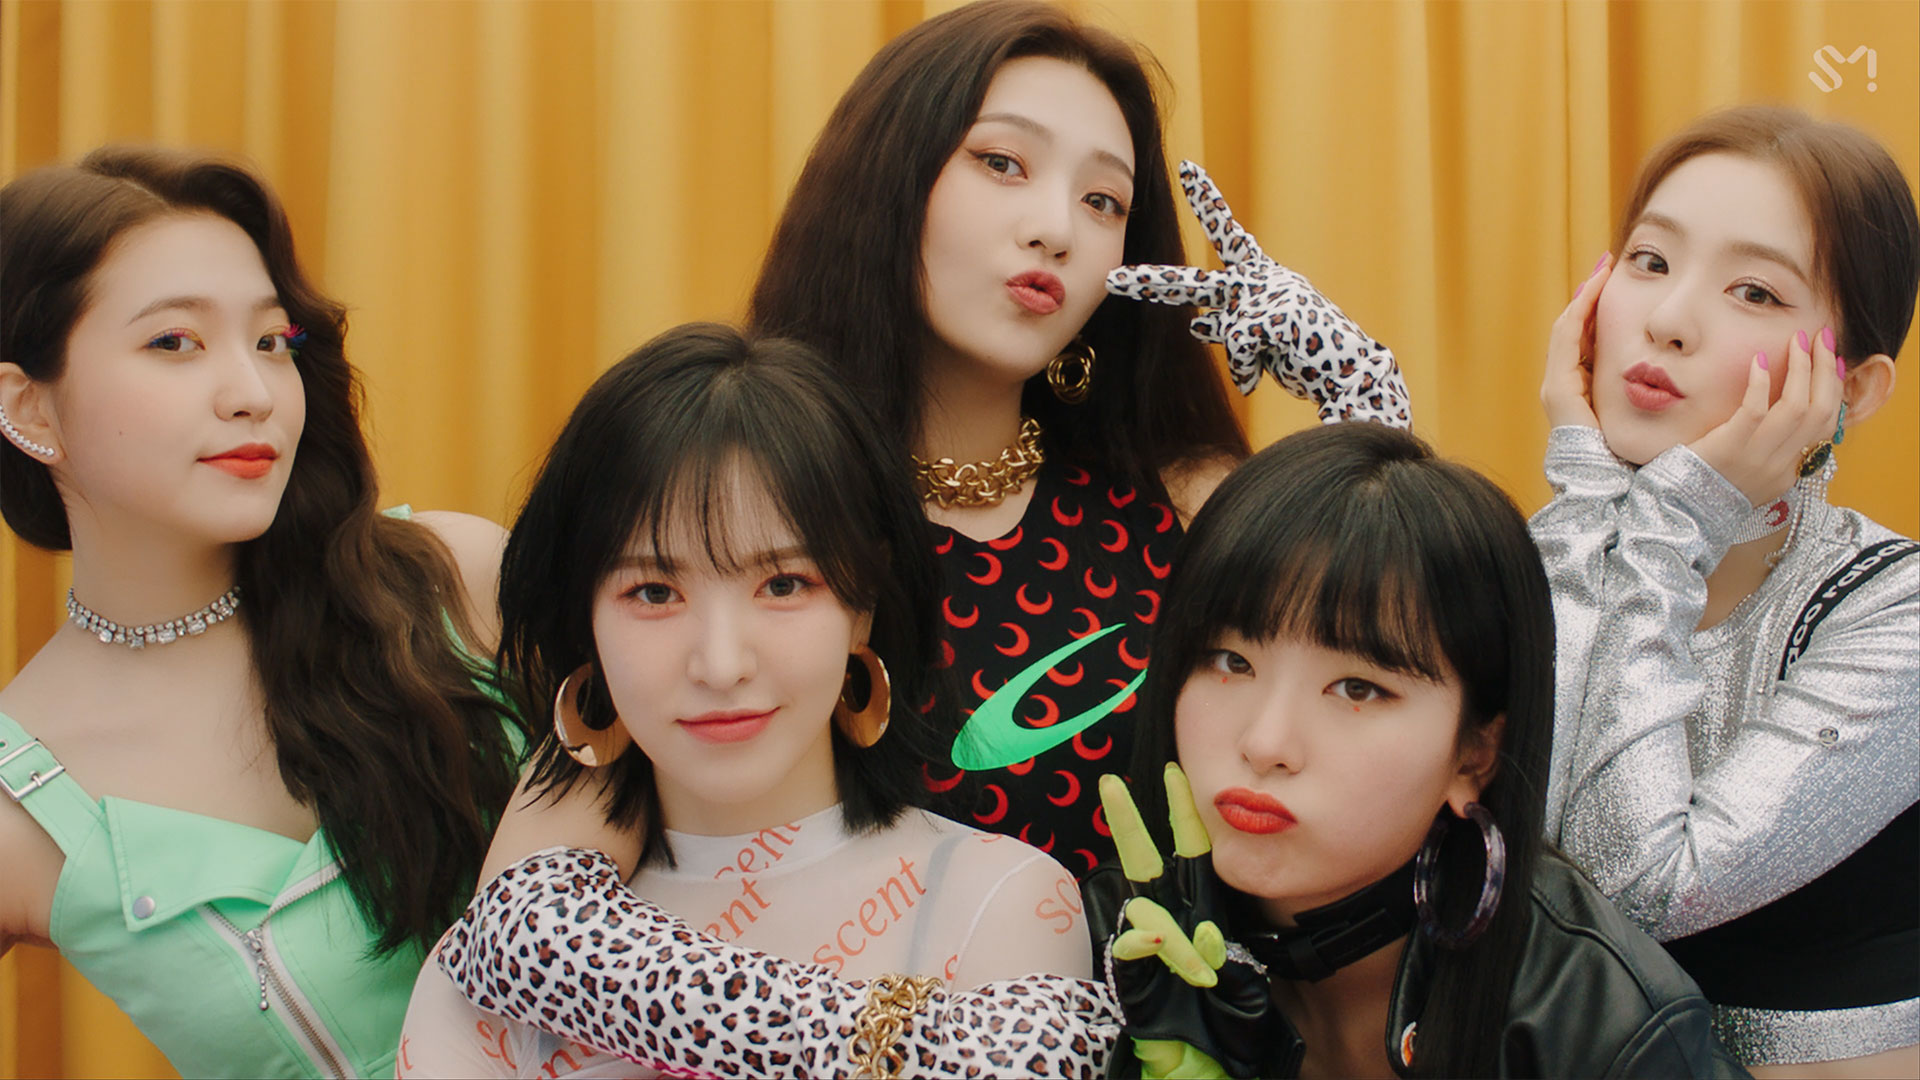 Versatile or Chaotic Red Velvet Lose Direction with The ReVe